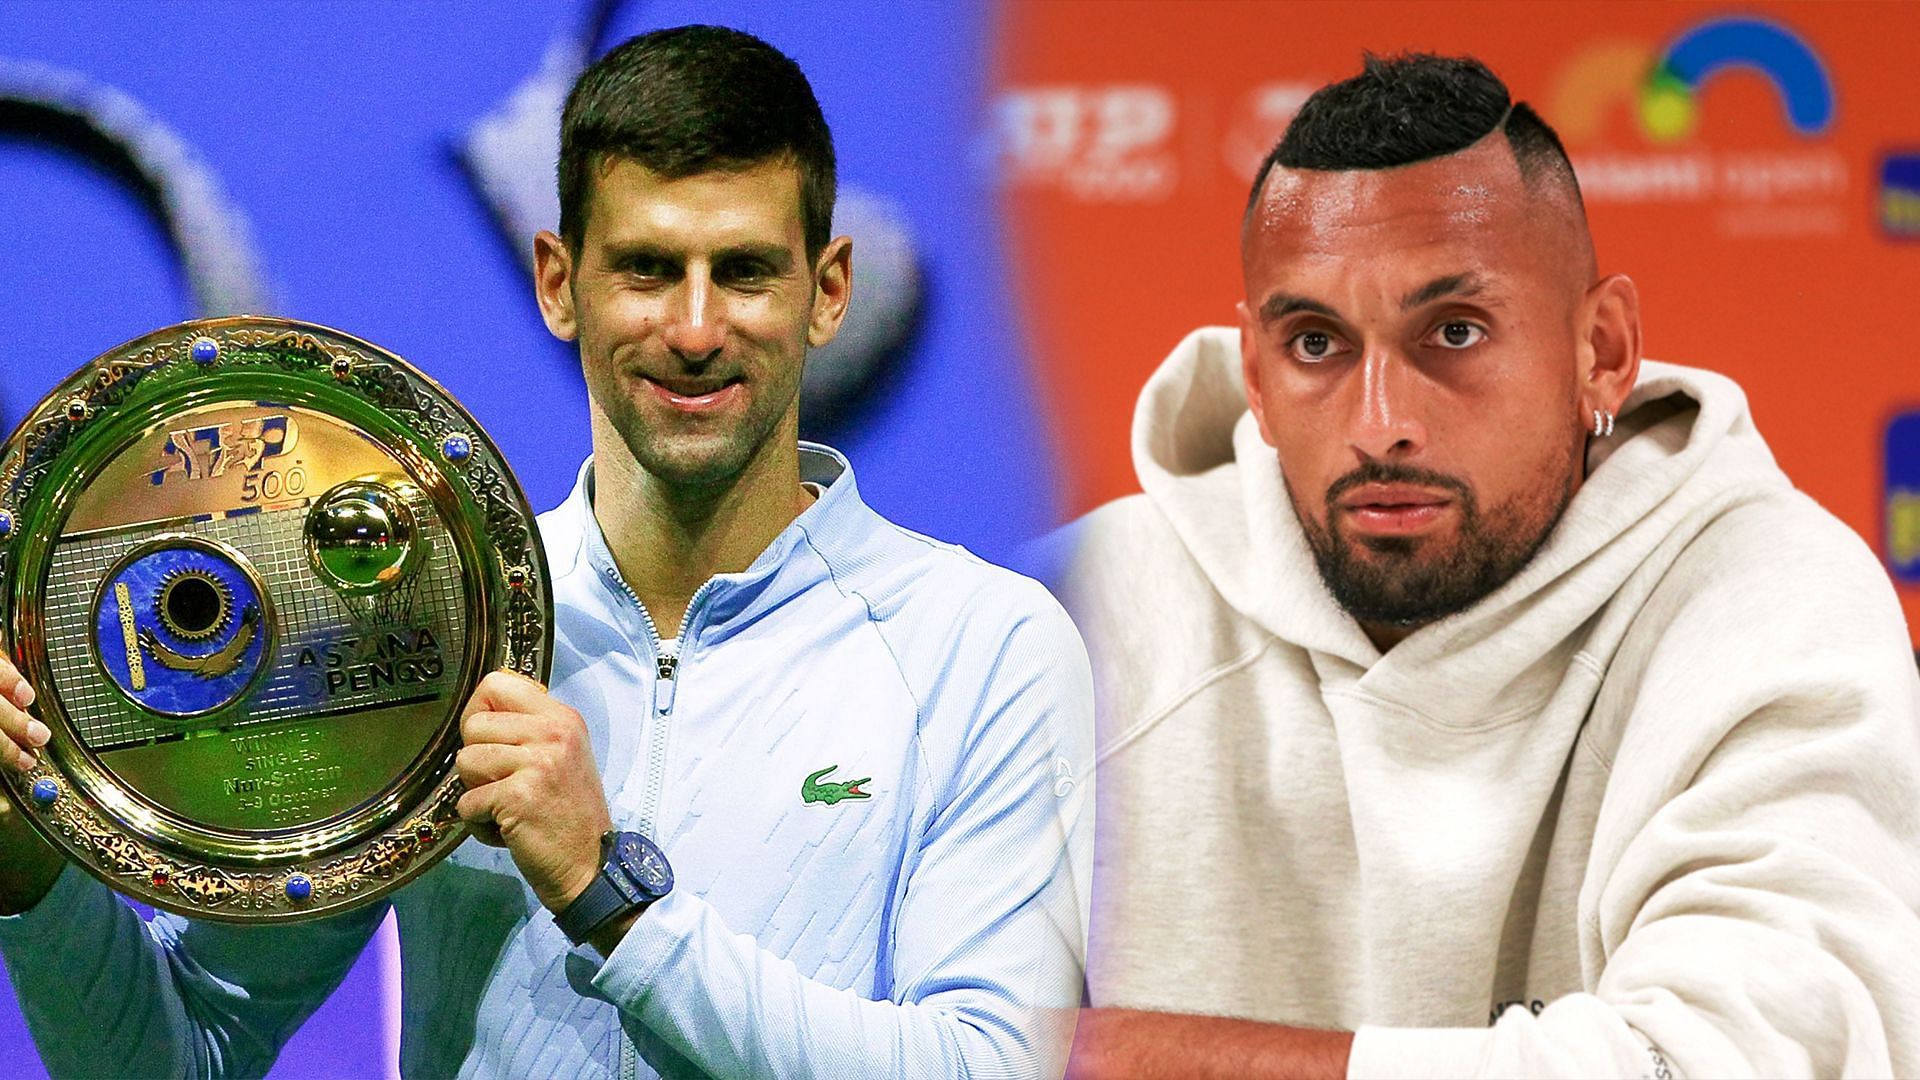 NickN Kyrgios hopes that Novak Djokovic will be allowed to compete in the Australian Open next year.